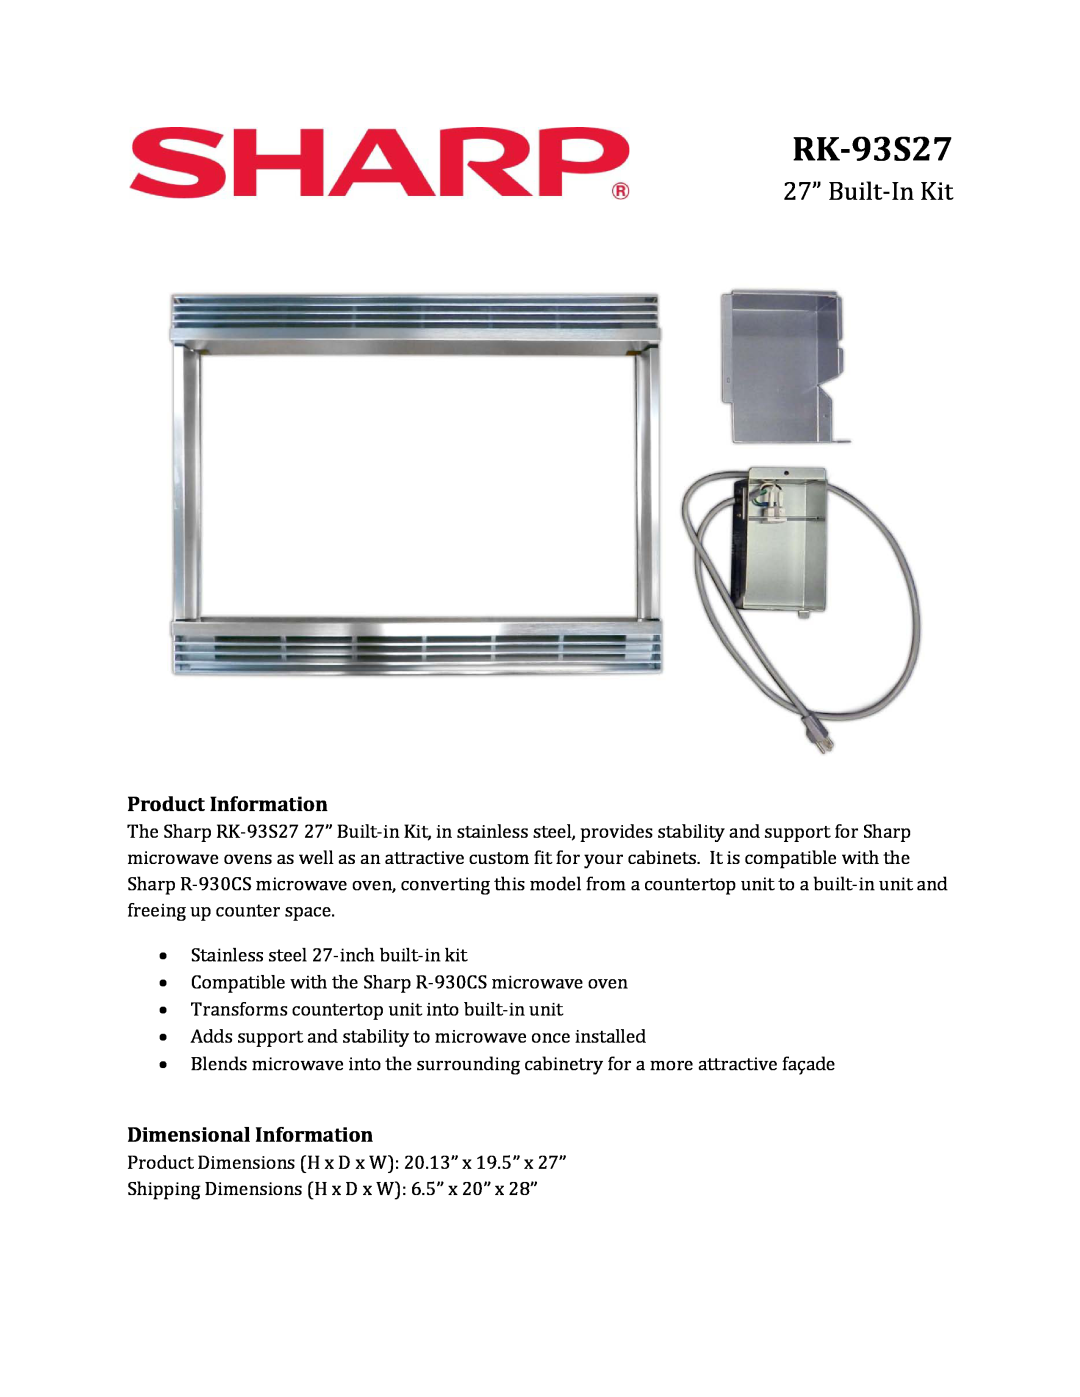 Sharp RK93S27 dimensions RK-93S27, 27” Built-In Trim Kit, Product Information, Dimensional Information 